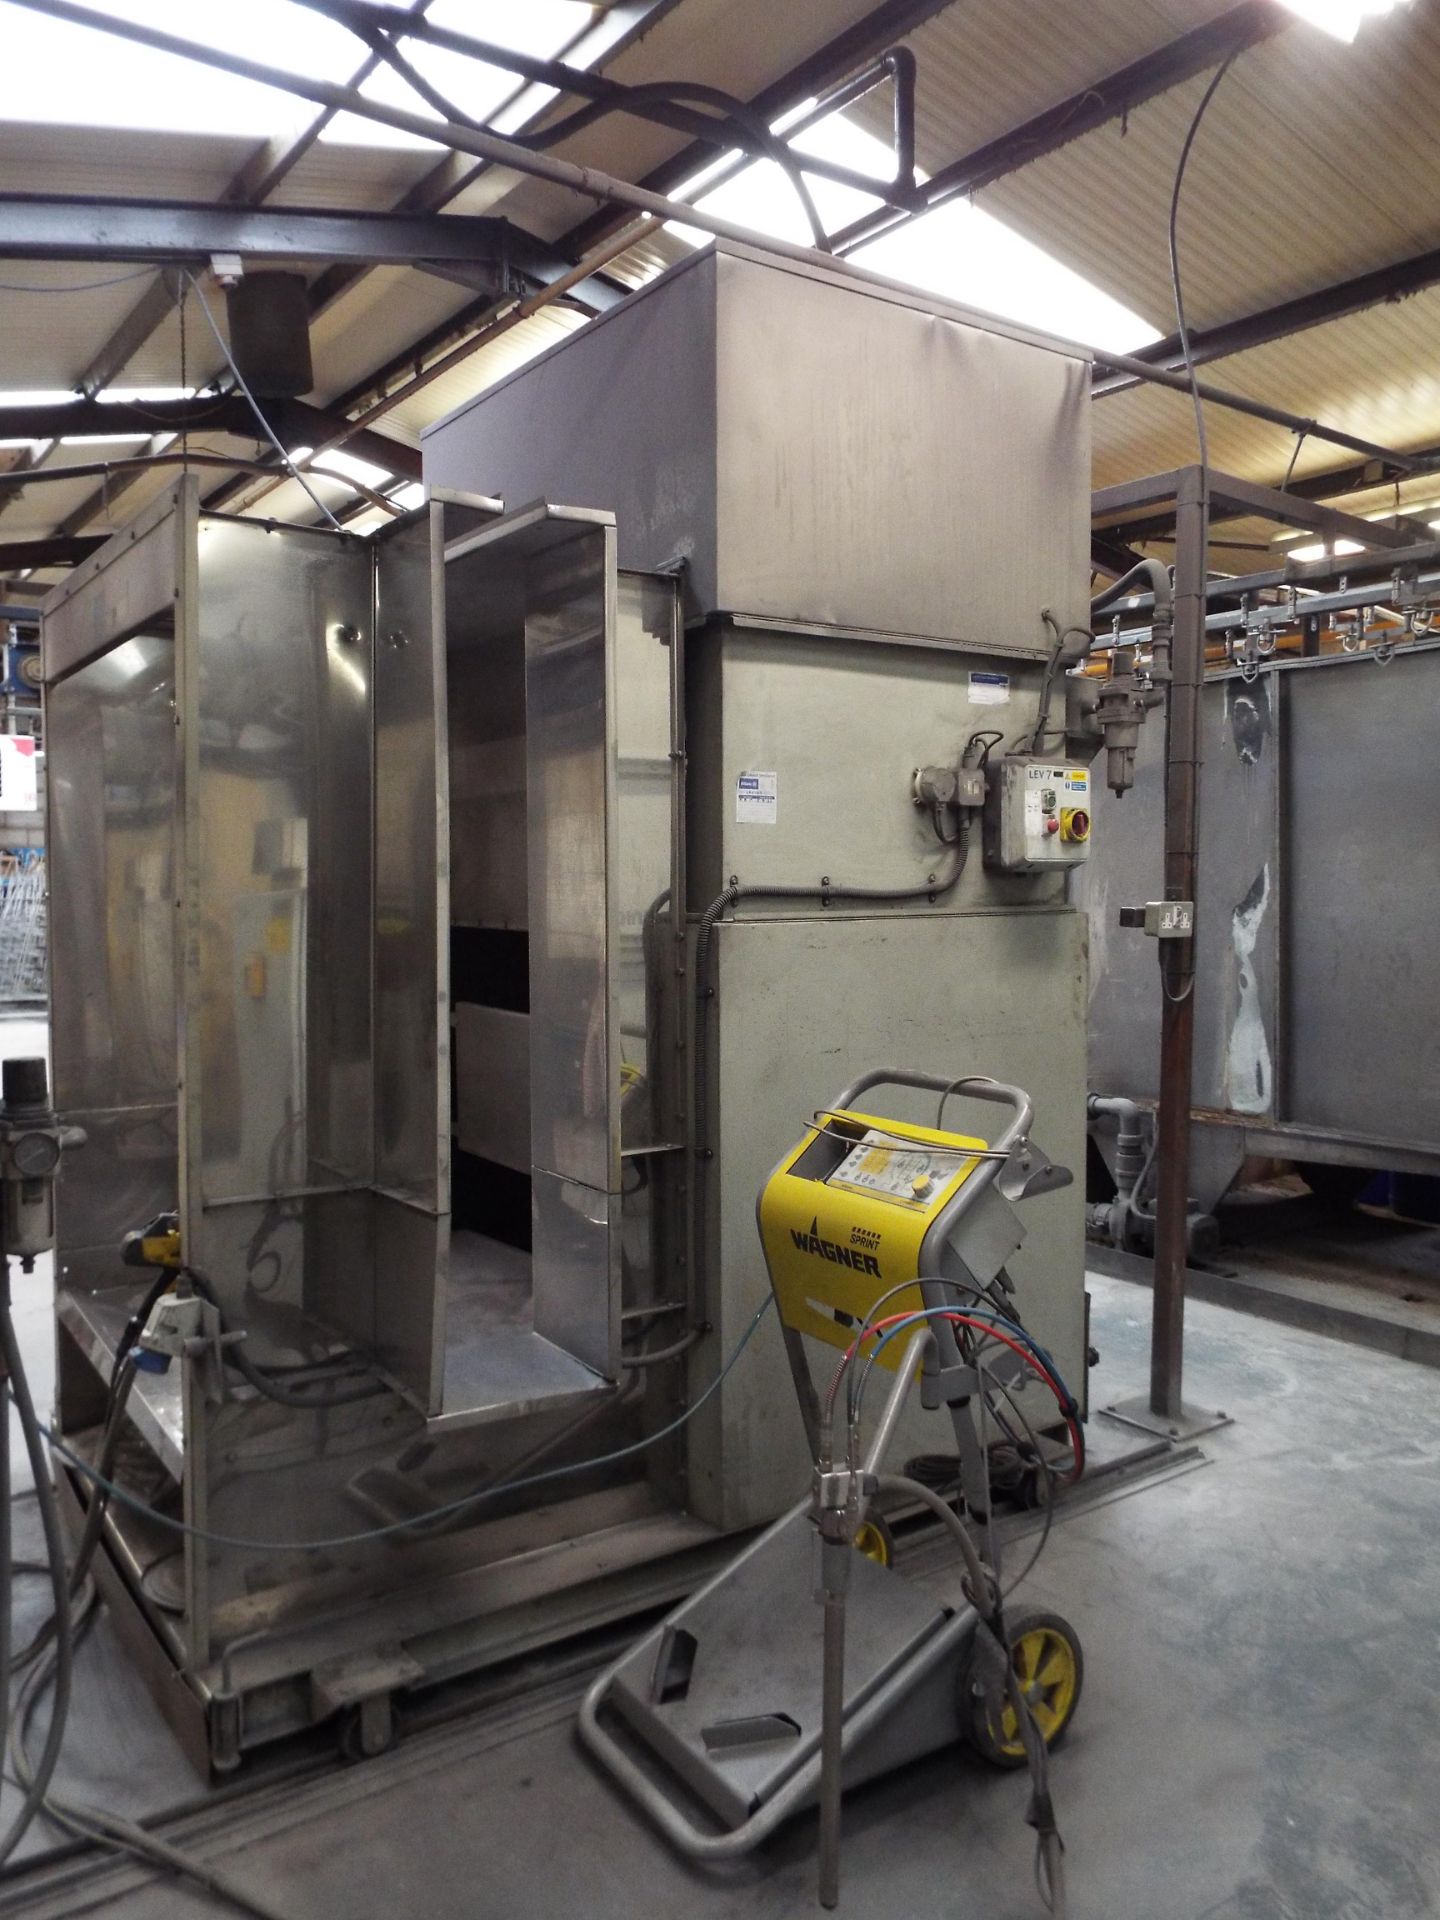 Modern, Compact Nordsen Versa Powder Coating Facility with On-Line Pre-treatment. - Image 19 of 36